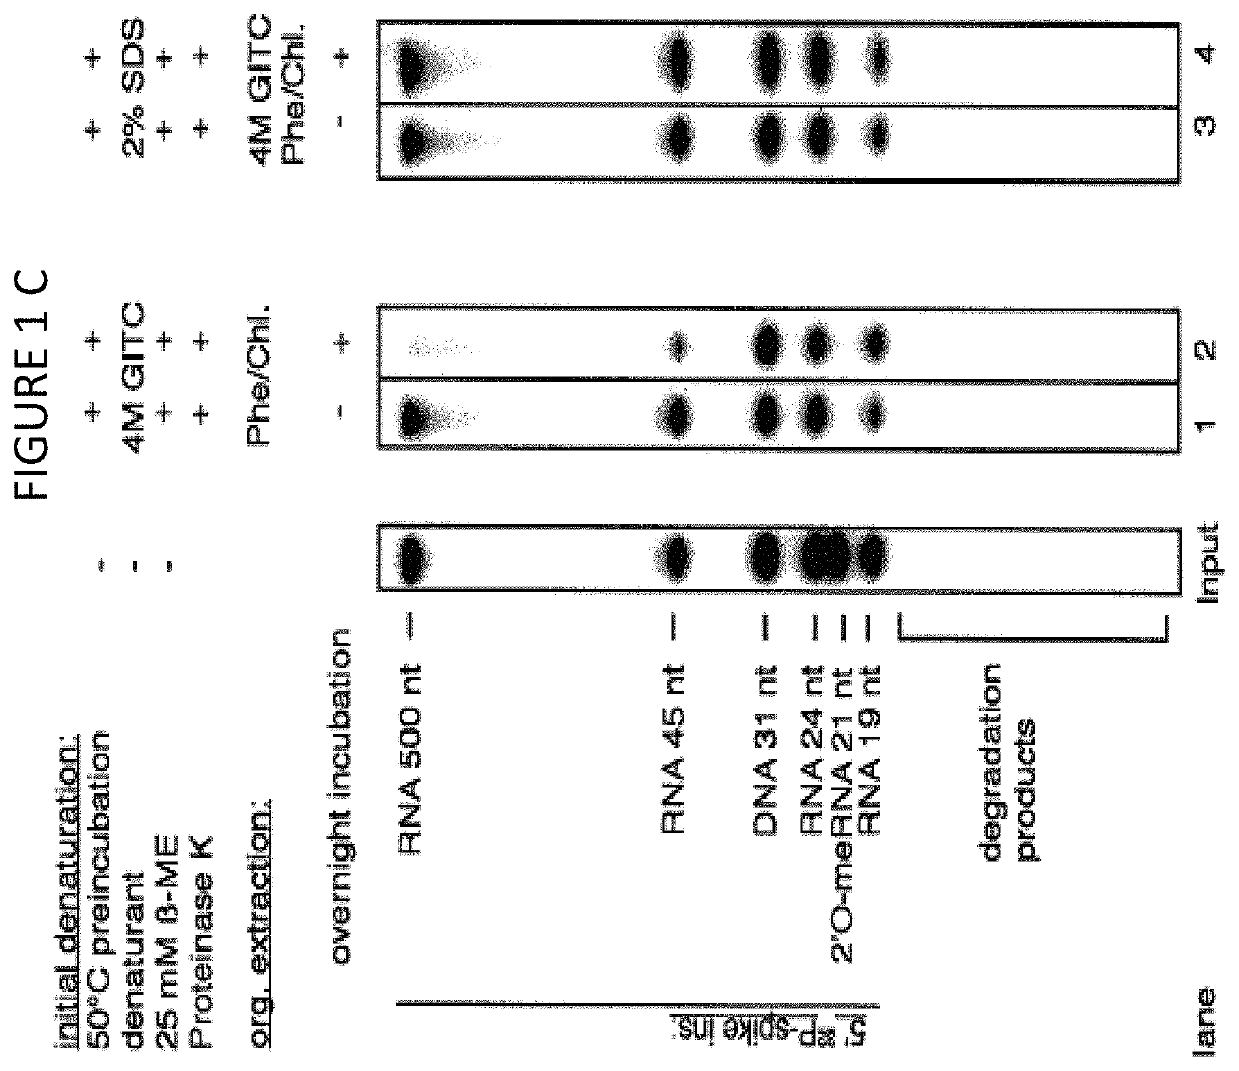 Method of RNA isolation from clinical samples